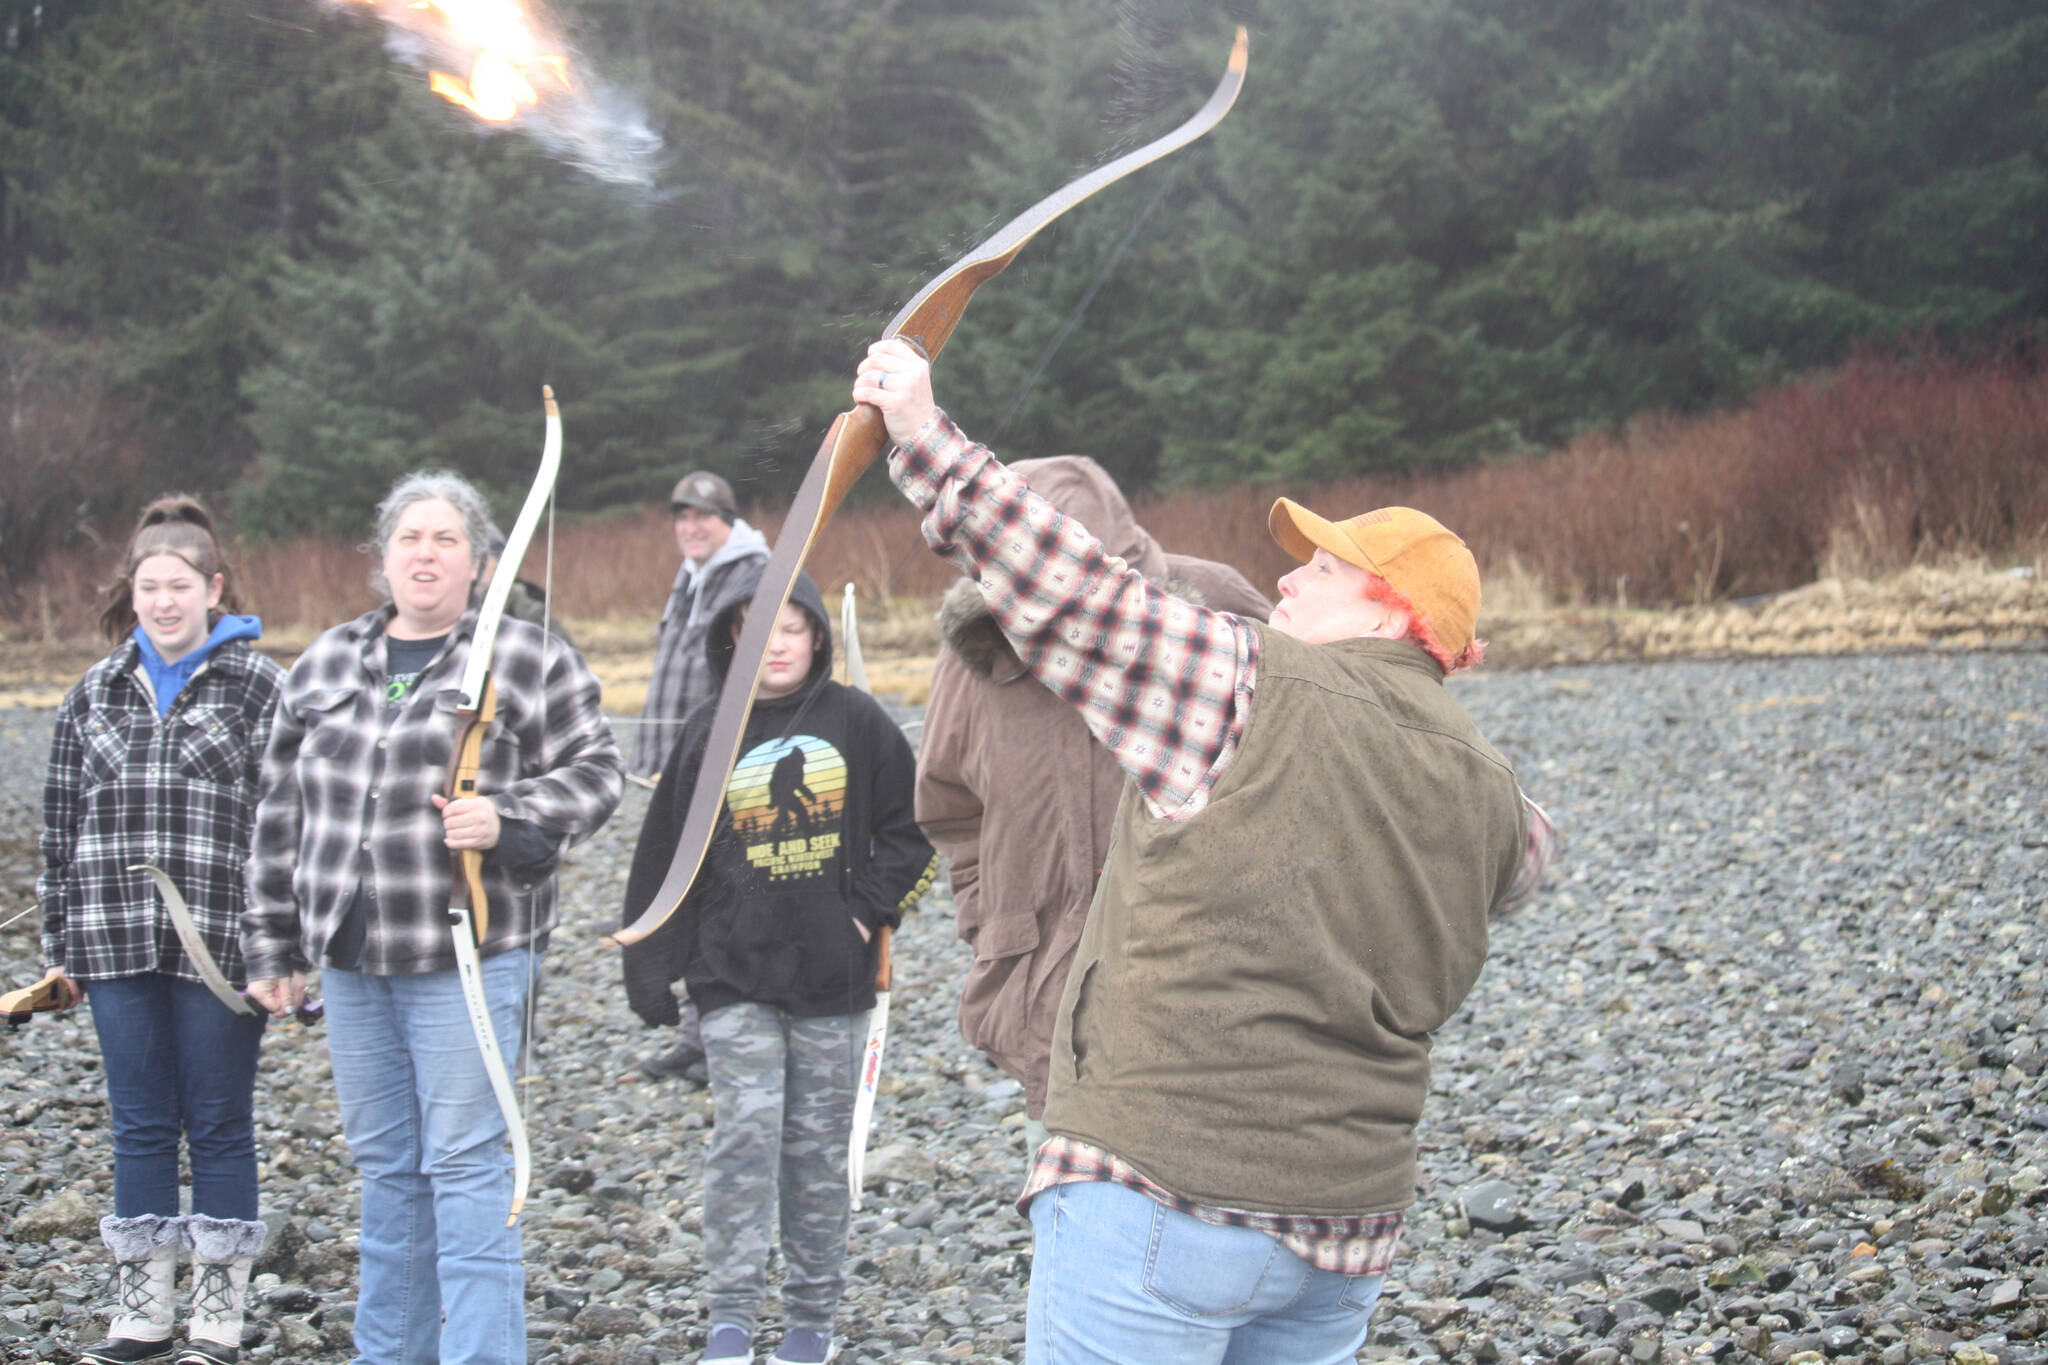 Tiffany Sargent Hallquist shoots a flaming arrow into the air to honor her late father Daniel Sargent during a memorial ceremony on Saturday at Auke Bay Recreation Area. (Jonson Kuhn / Juneau Empire)